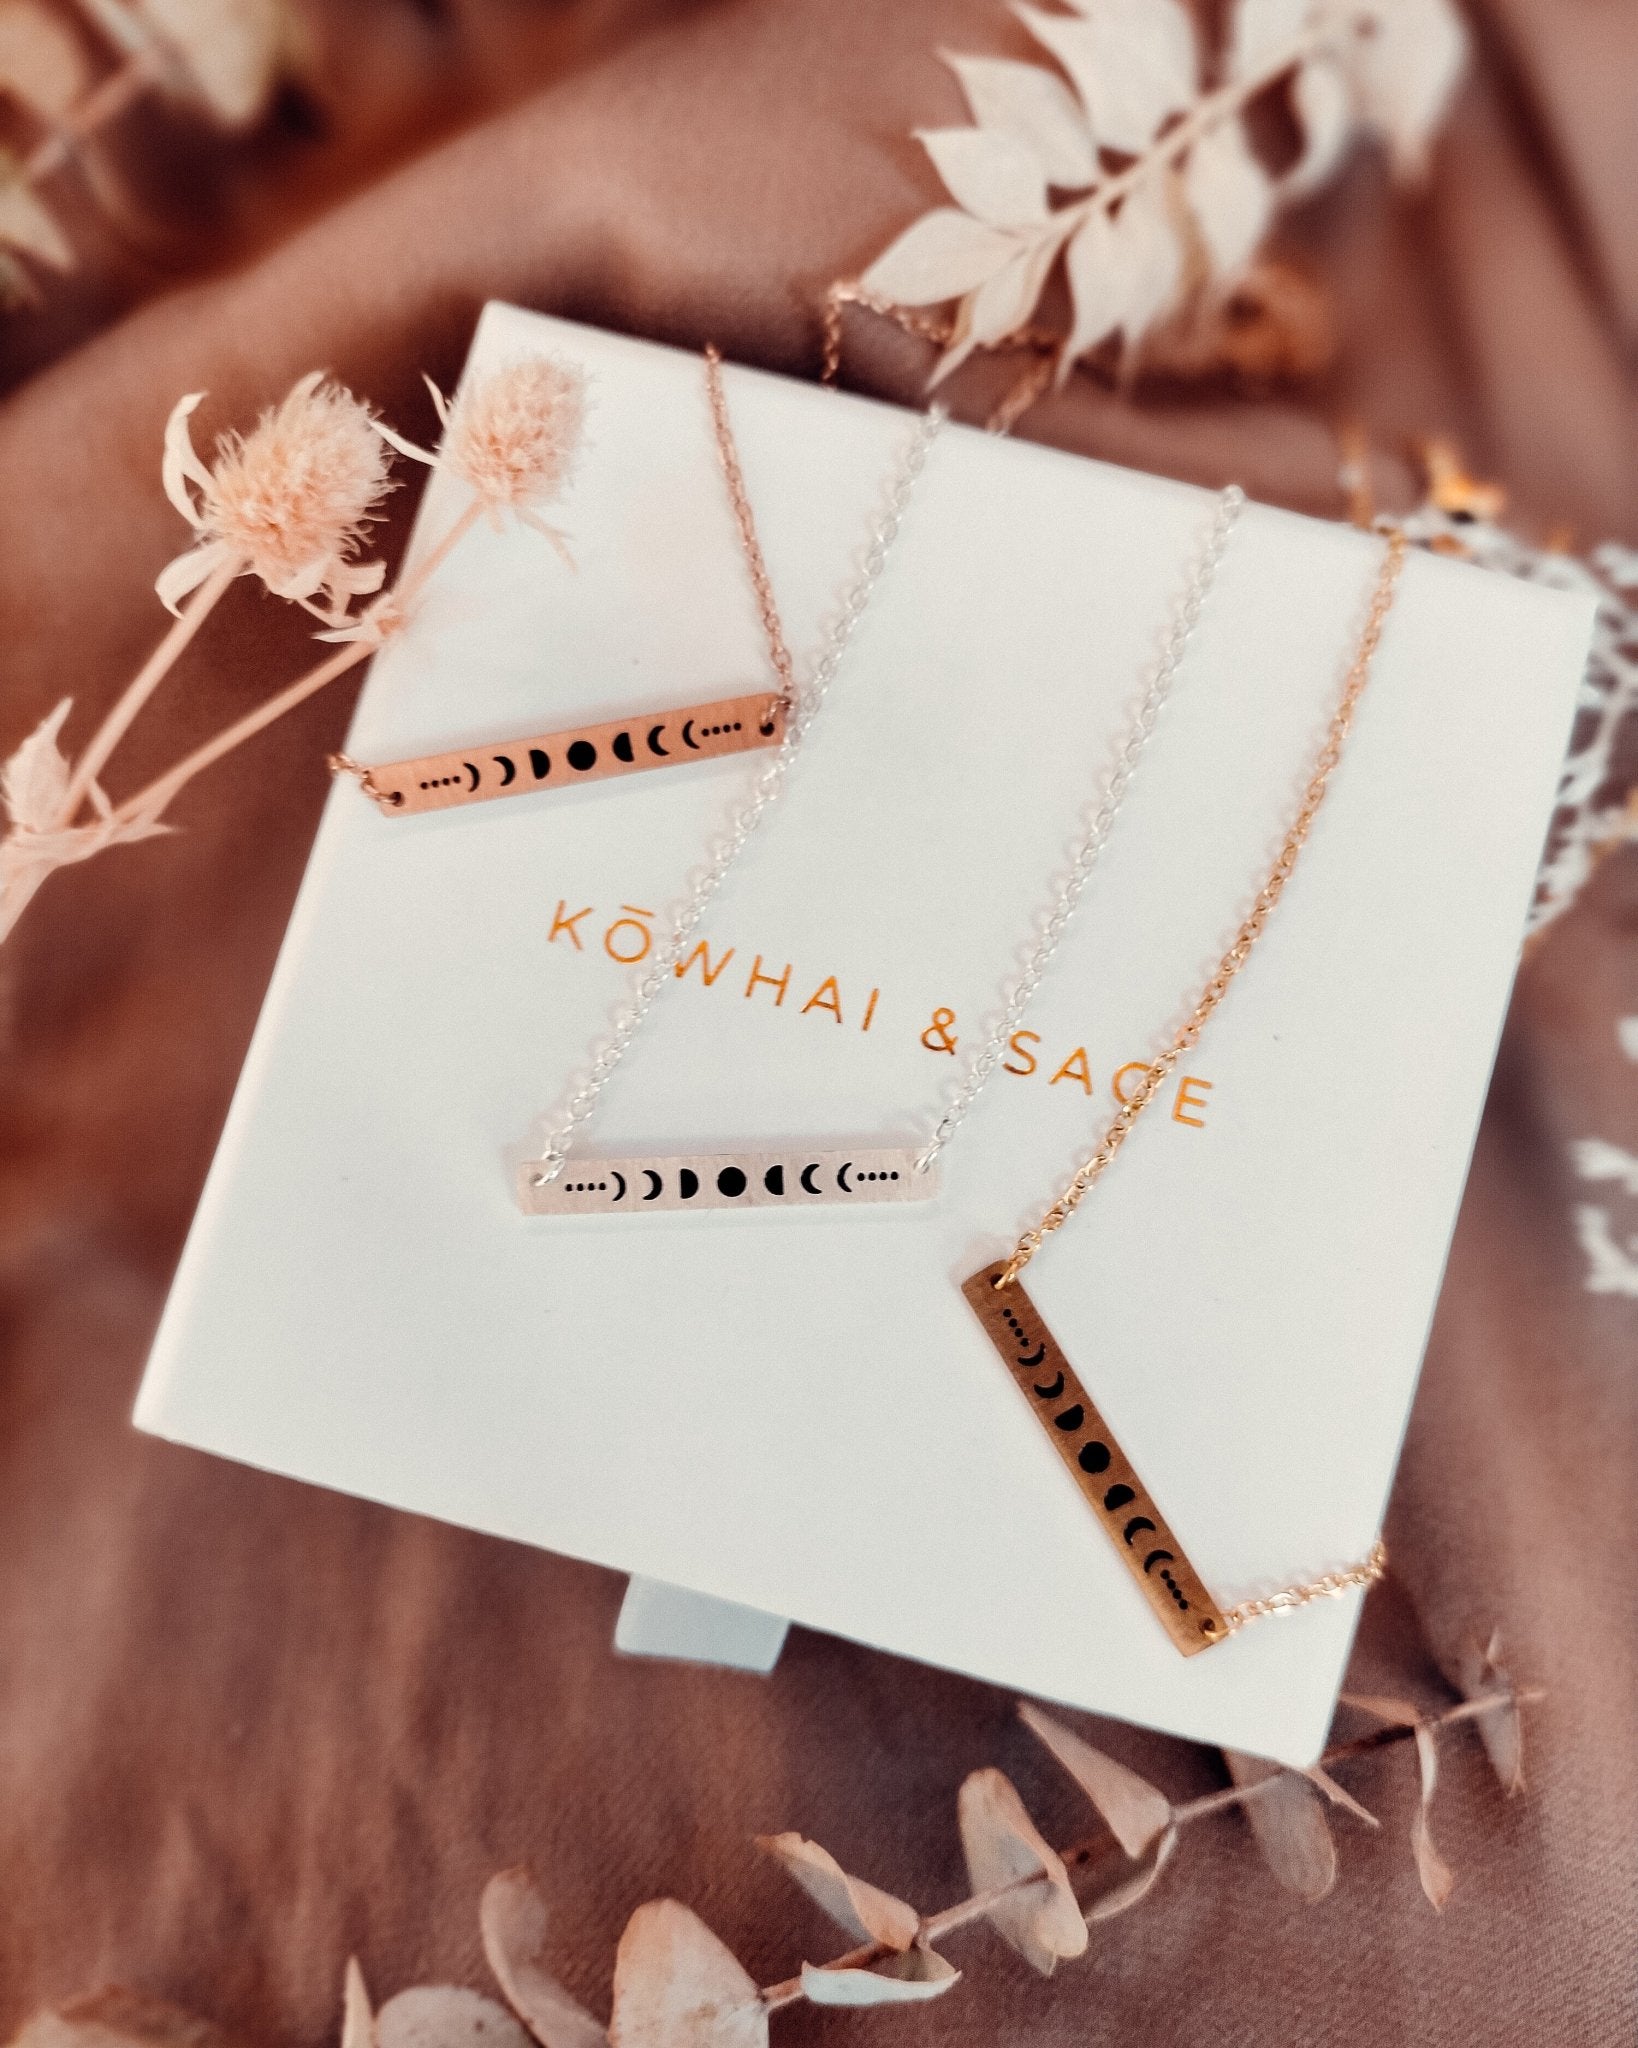 Moon Phase Bar Necklace - Kowhai and Sage